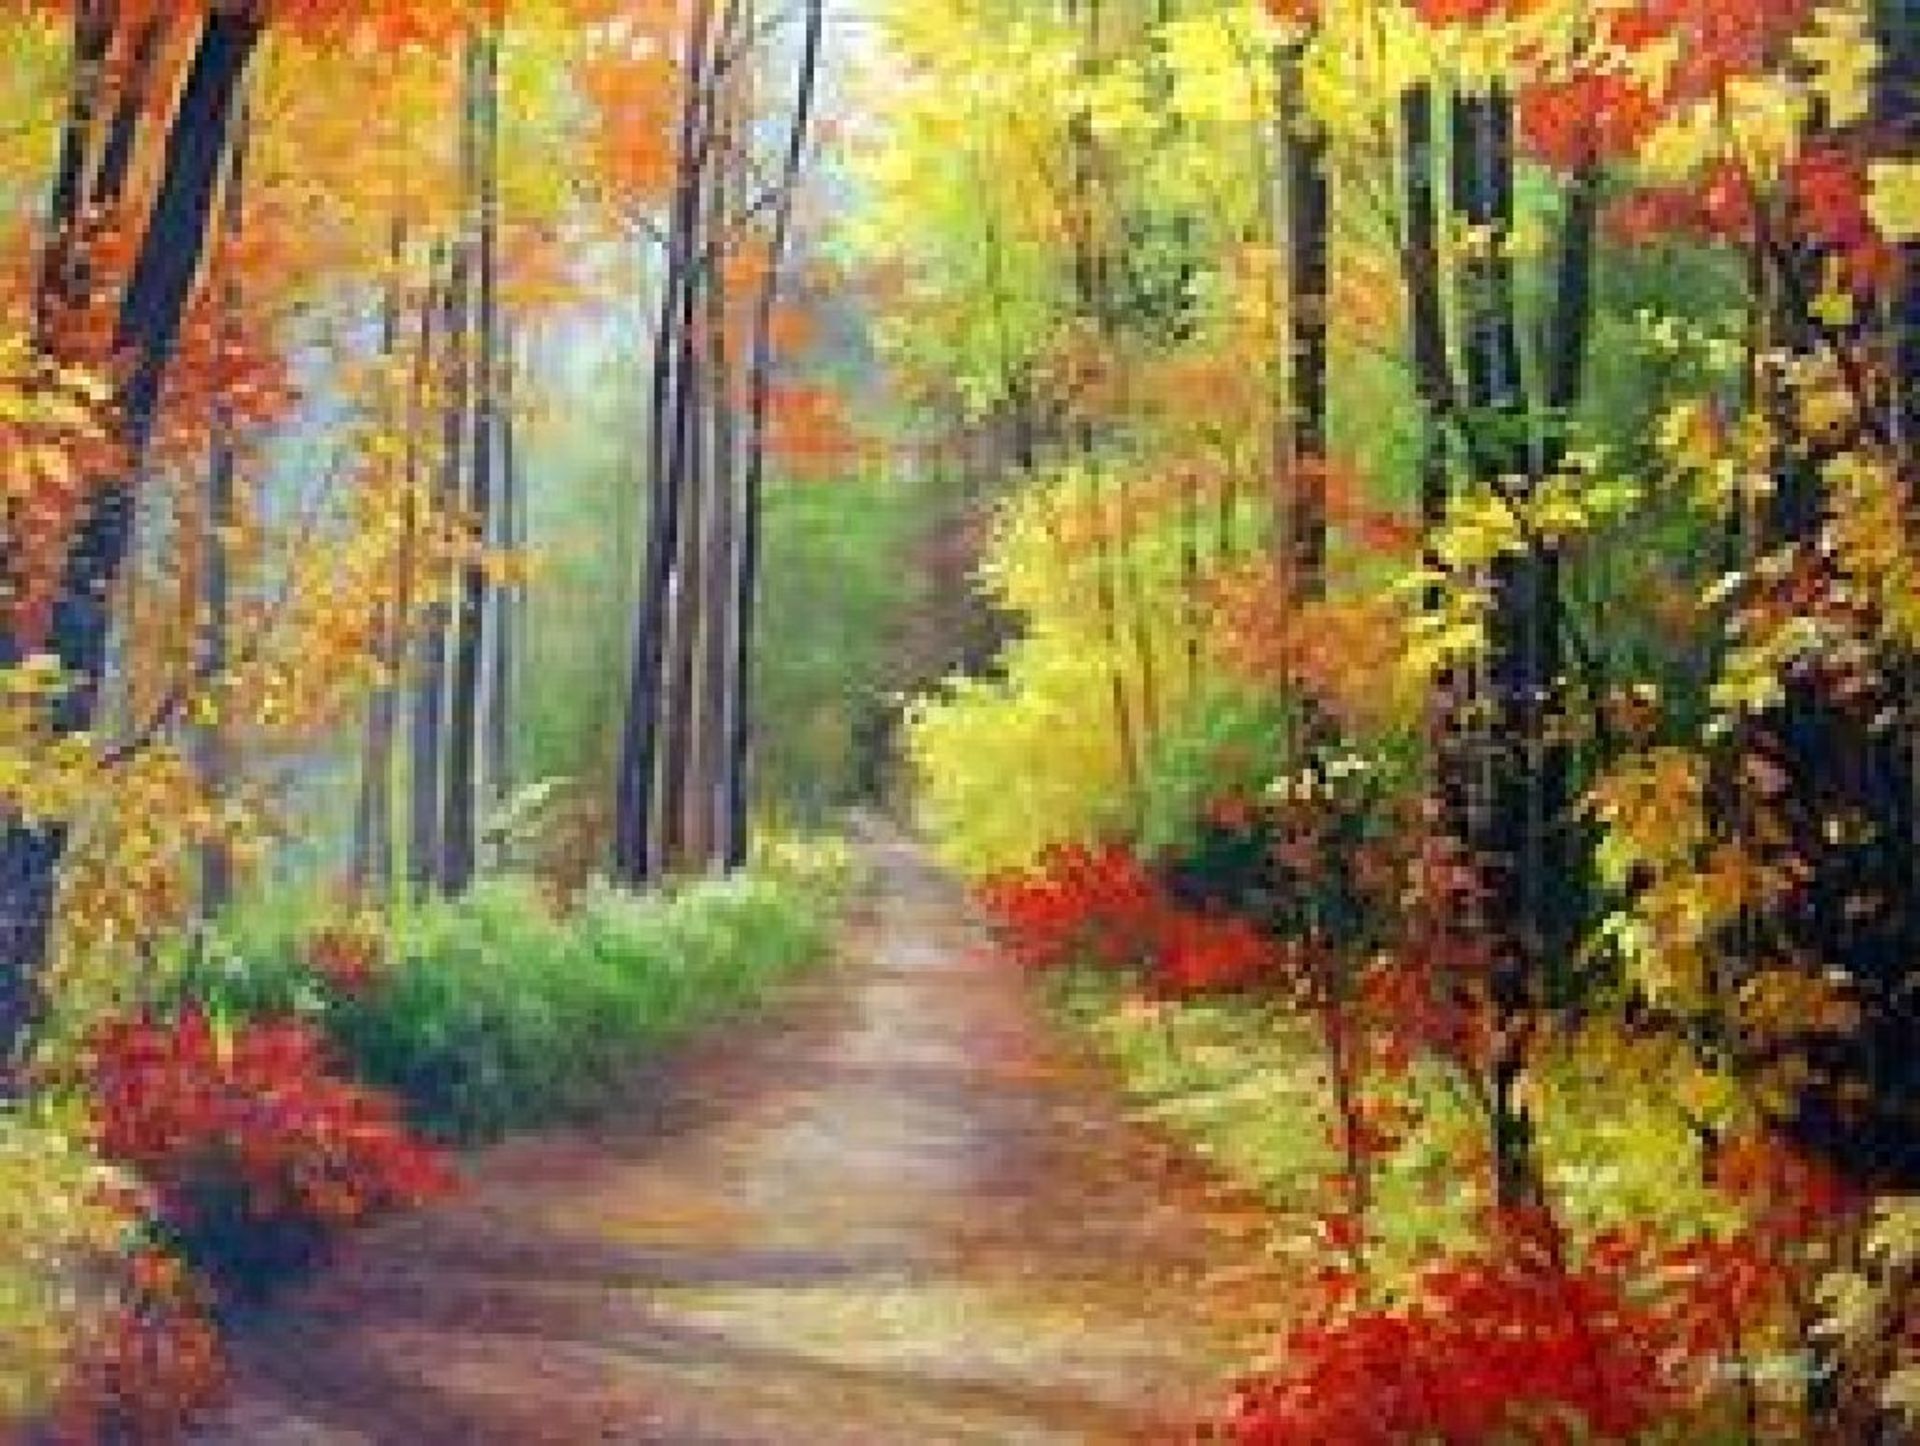 (ART) "A Stroll Among The Exquisite Fall Foliage" 30"h x 40"w (75x100cm) (LA4110-30) (59-DR682)